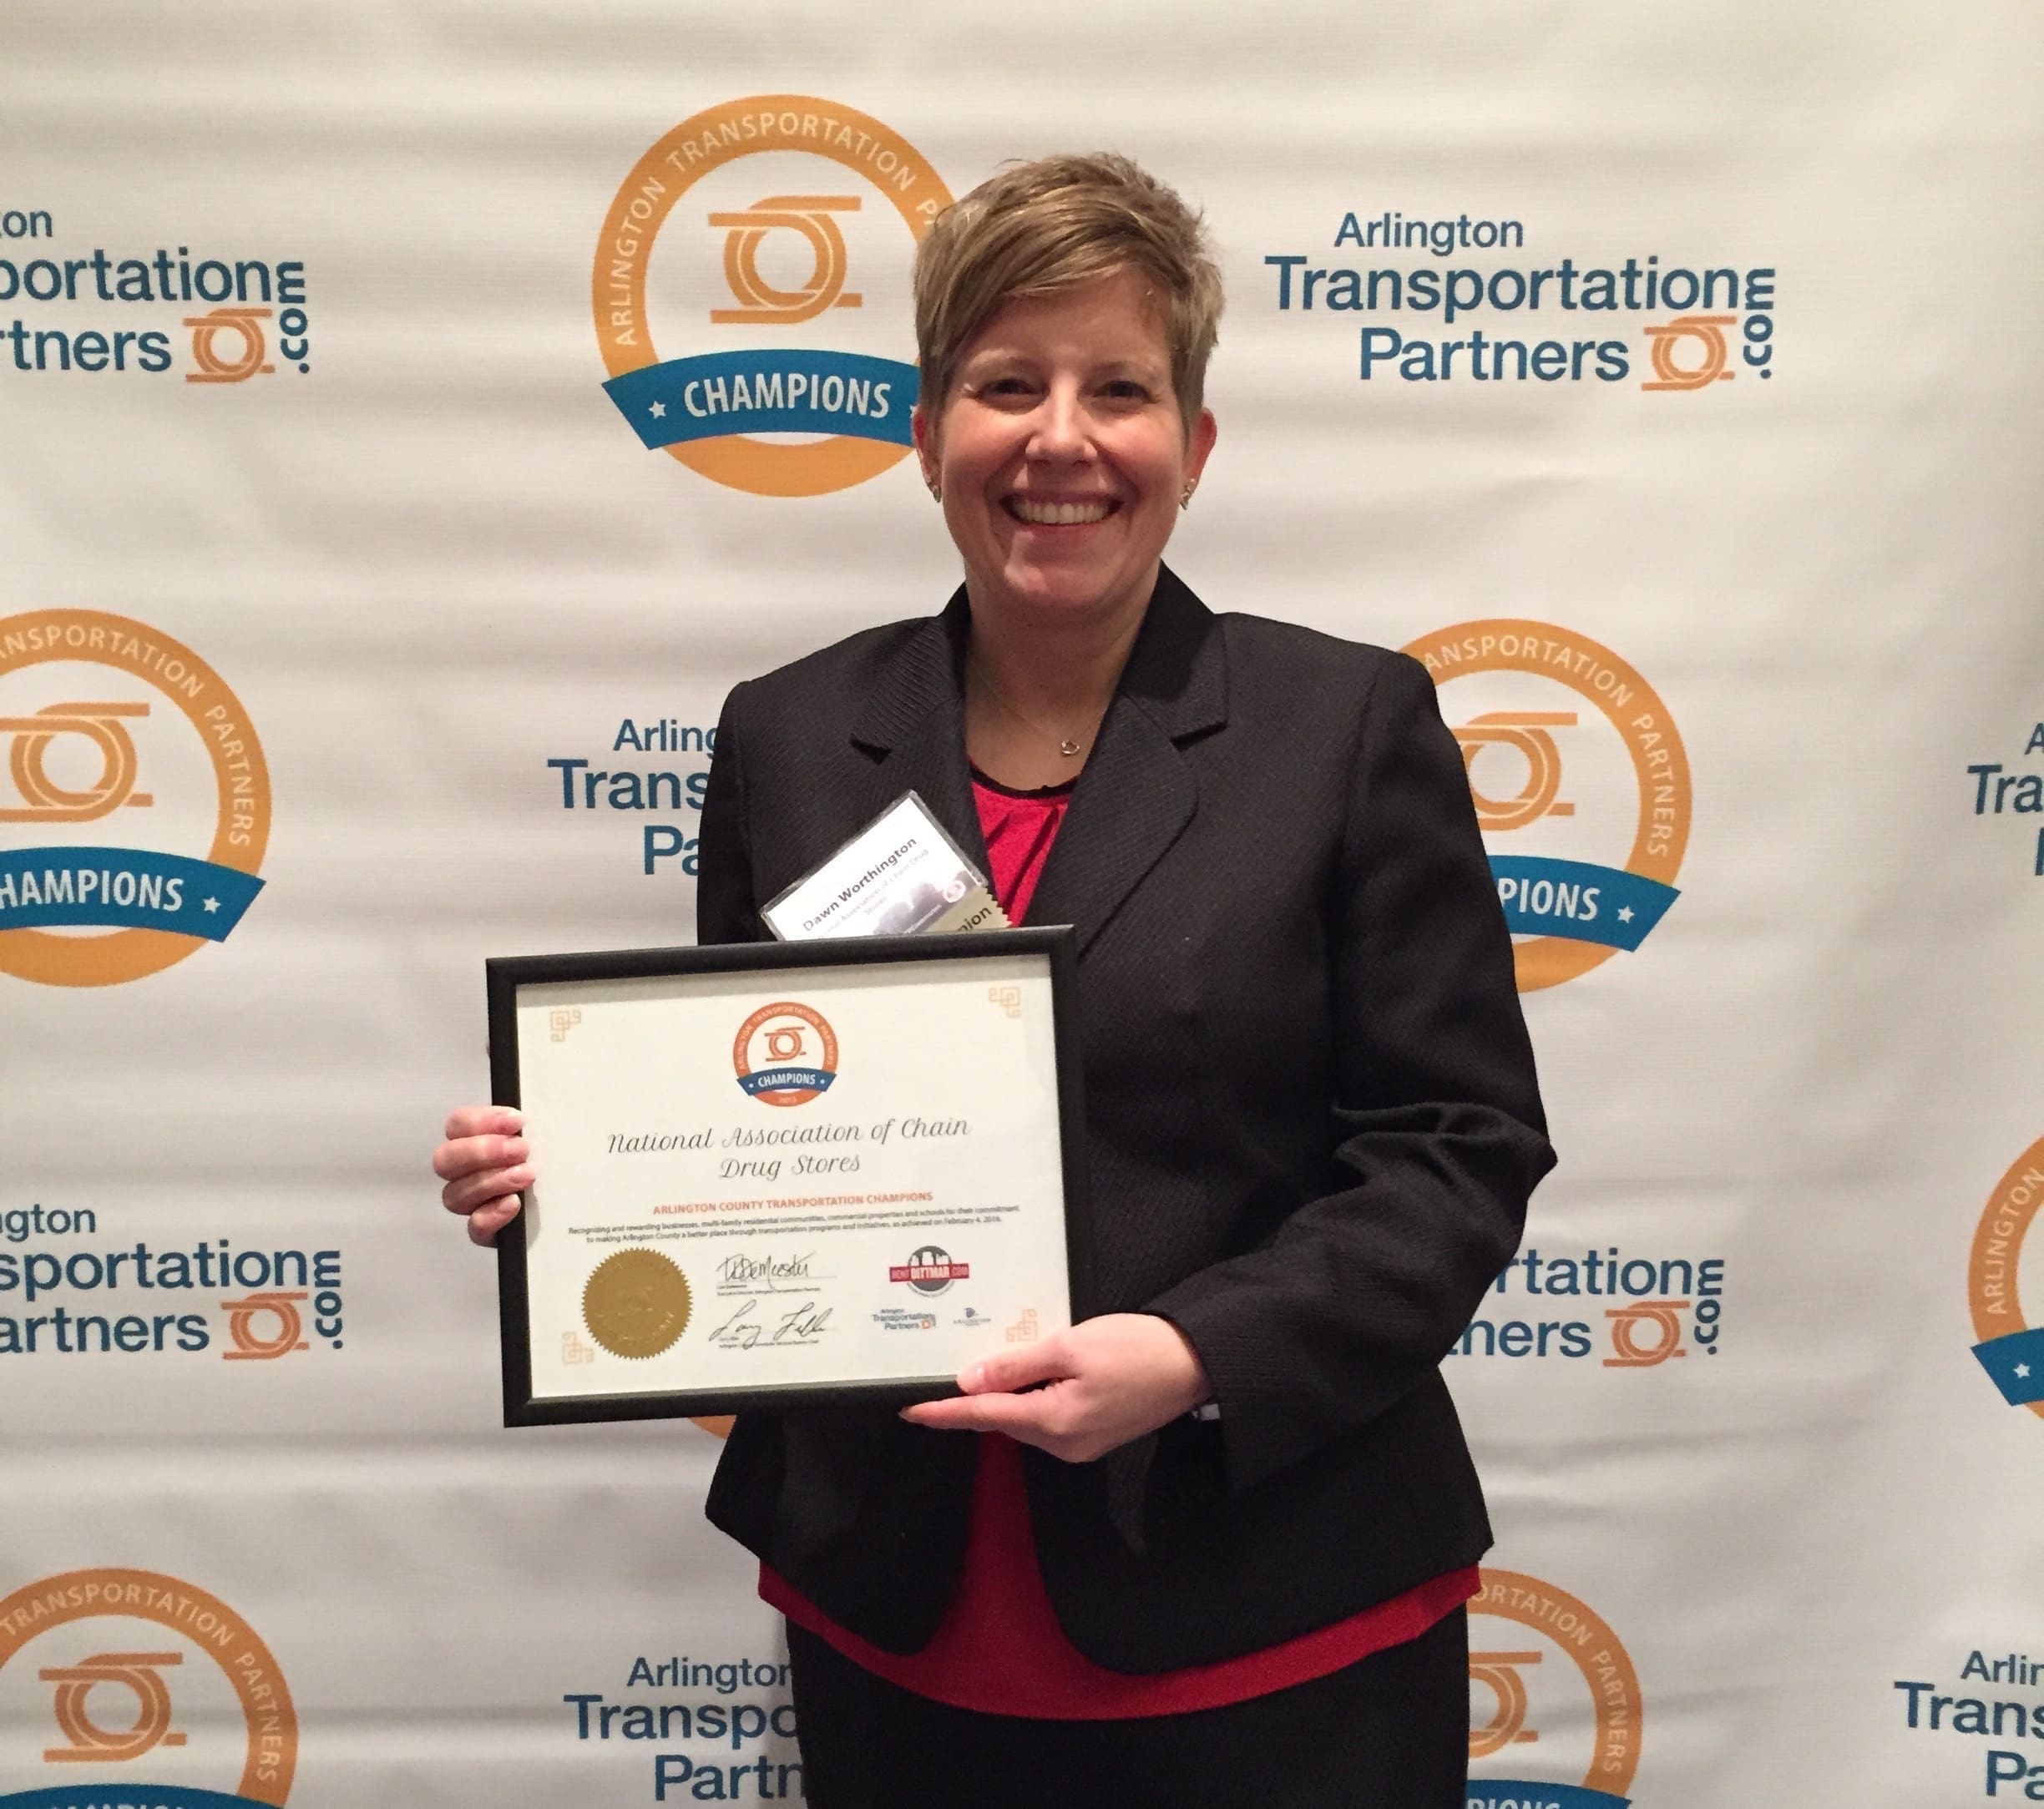 Dawn Worthington, NACDS’ vice president of human resources receIving the award from The Arlington Transportation Partners